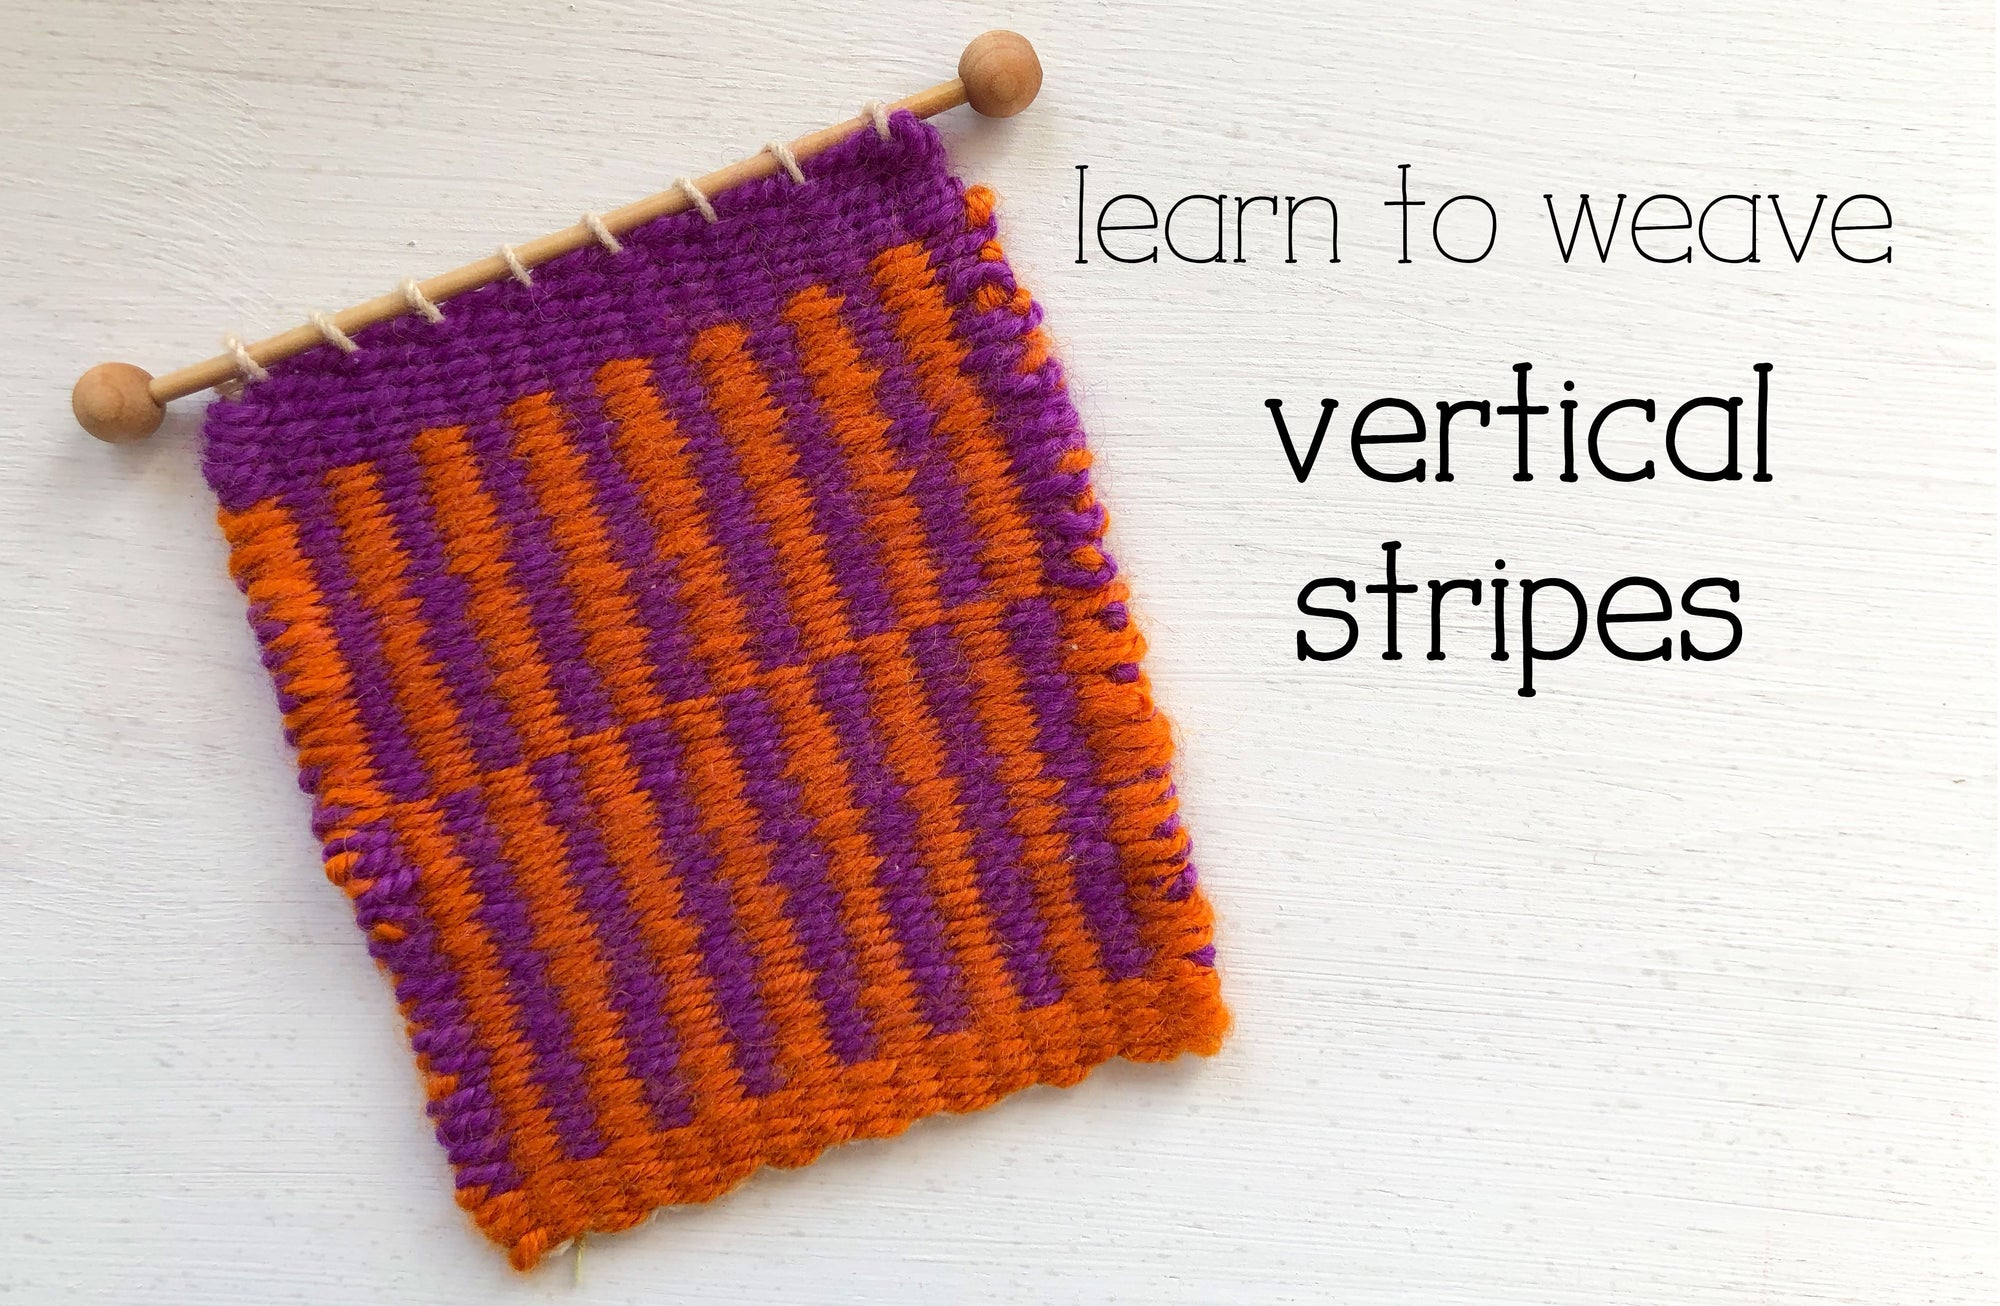 Learn to Weave Vertical Stripes on a Little Loom